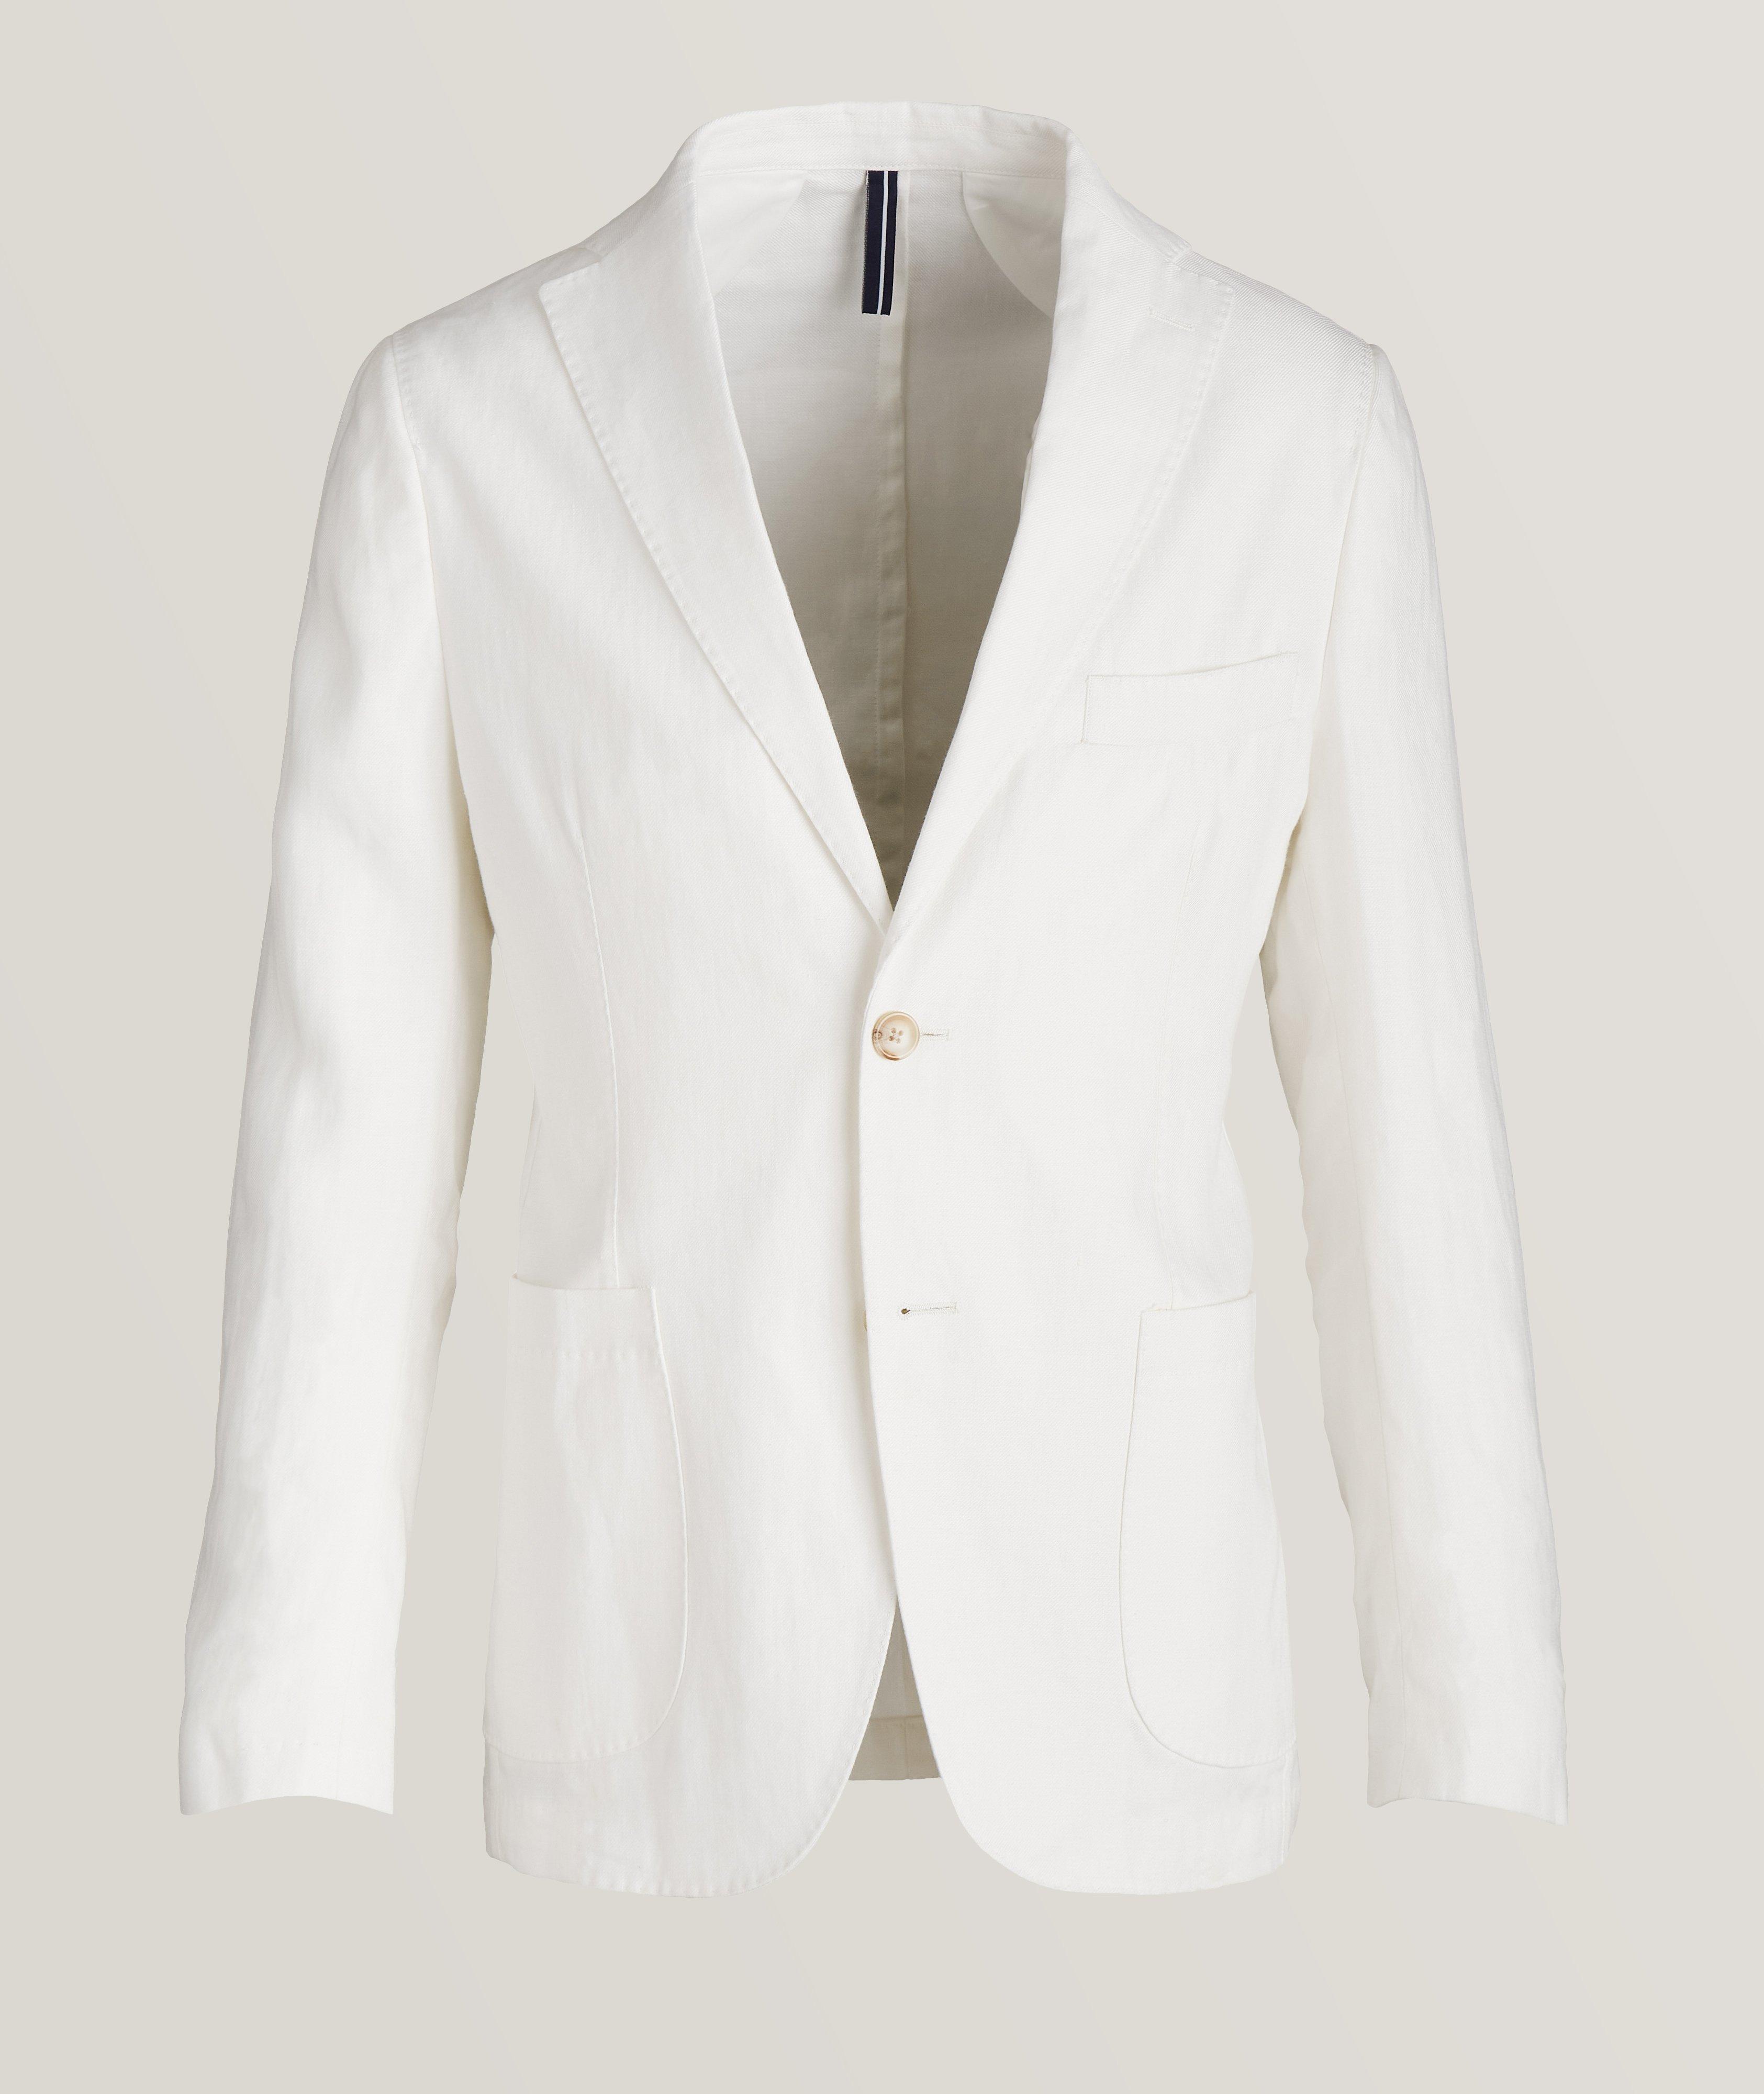 Two-Button Linen Sports Jacket image 0